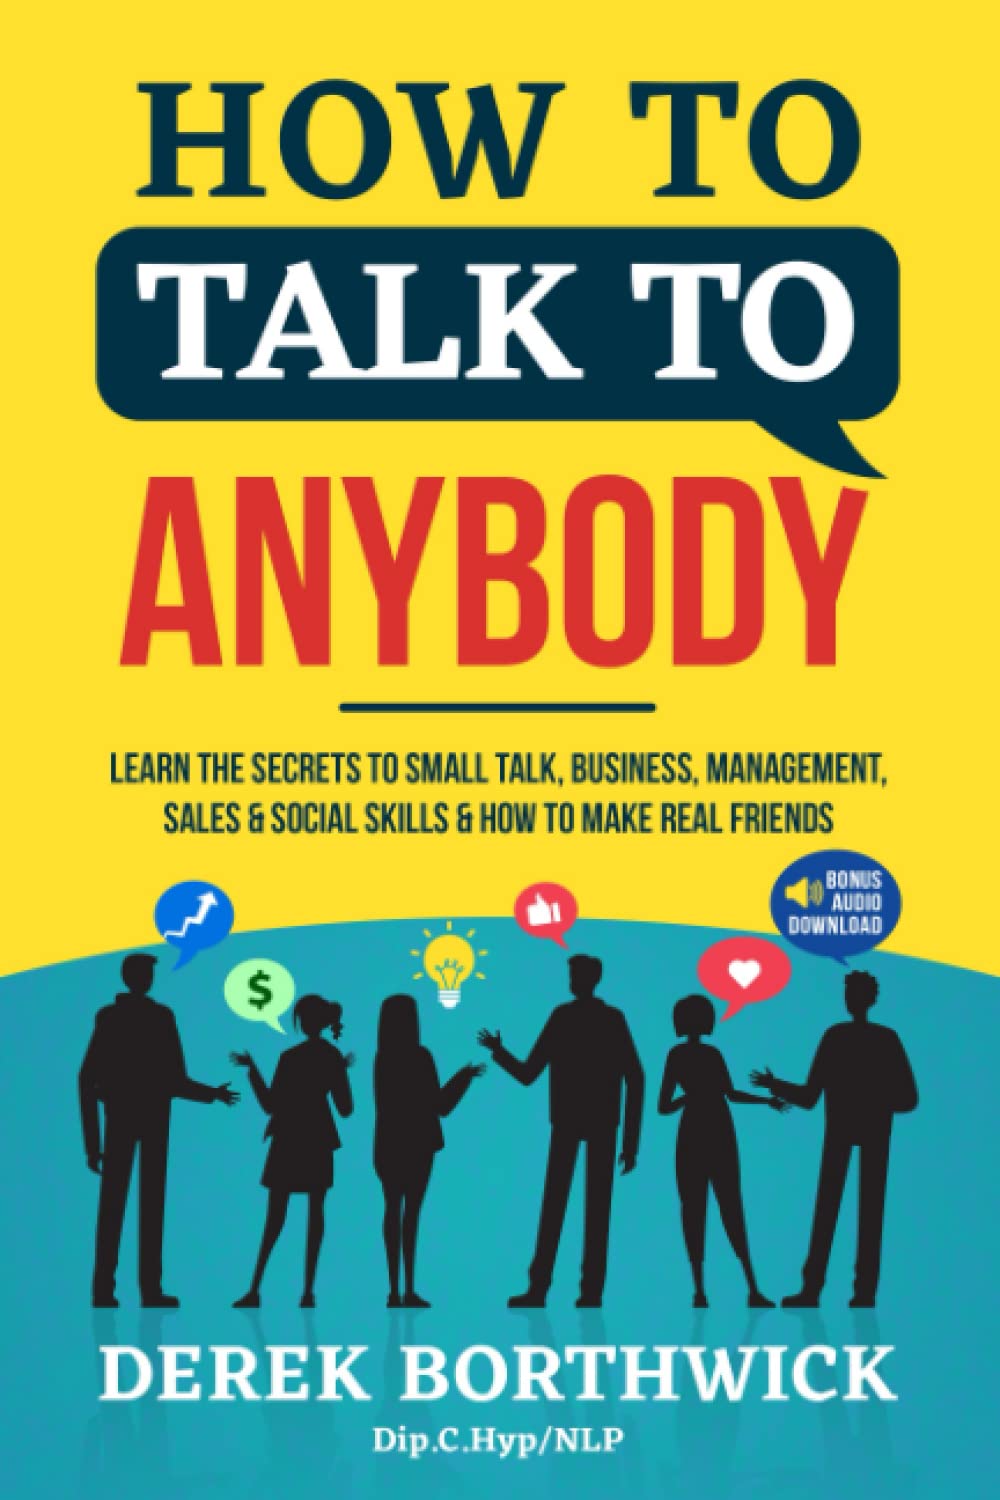 How To Talk To Anybody: Learn the Secrets to Small Talk, Business, Management, Sales & Social Skills & How to Make Real Friends